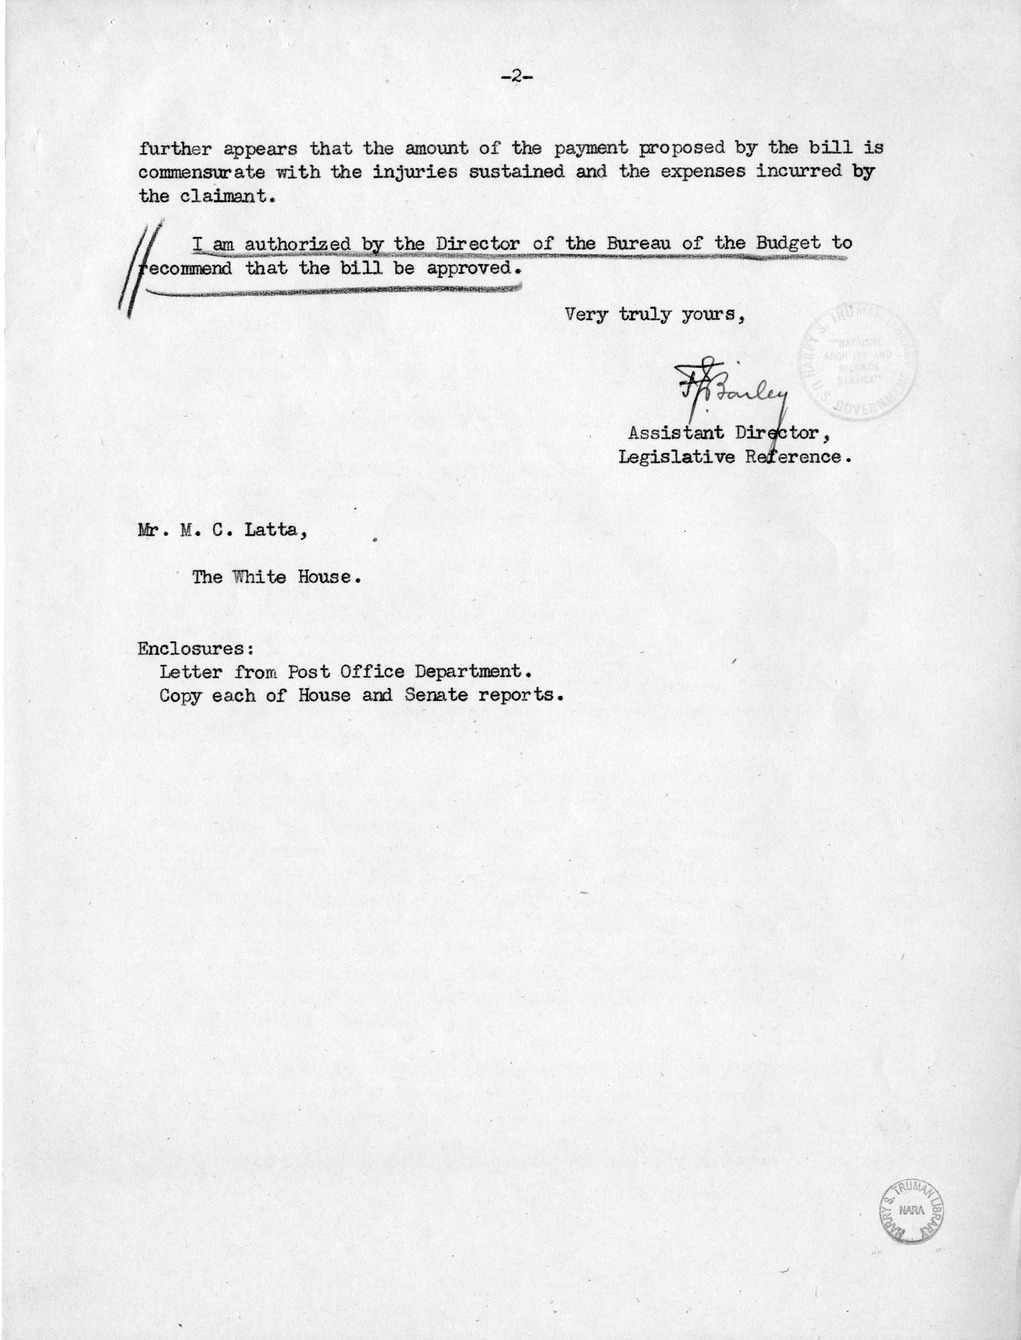 Memorandum from Frederick J. Bailey to M. C. Latta, H.R. 851, For the Relief of Oscar R. Steinert, with Attachments